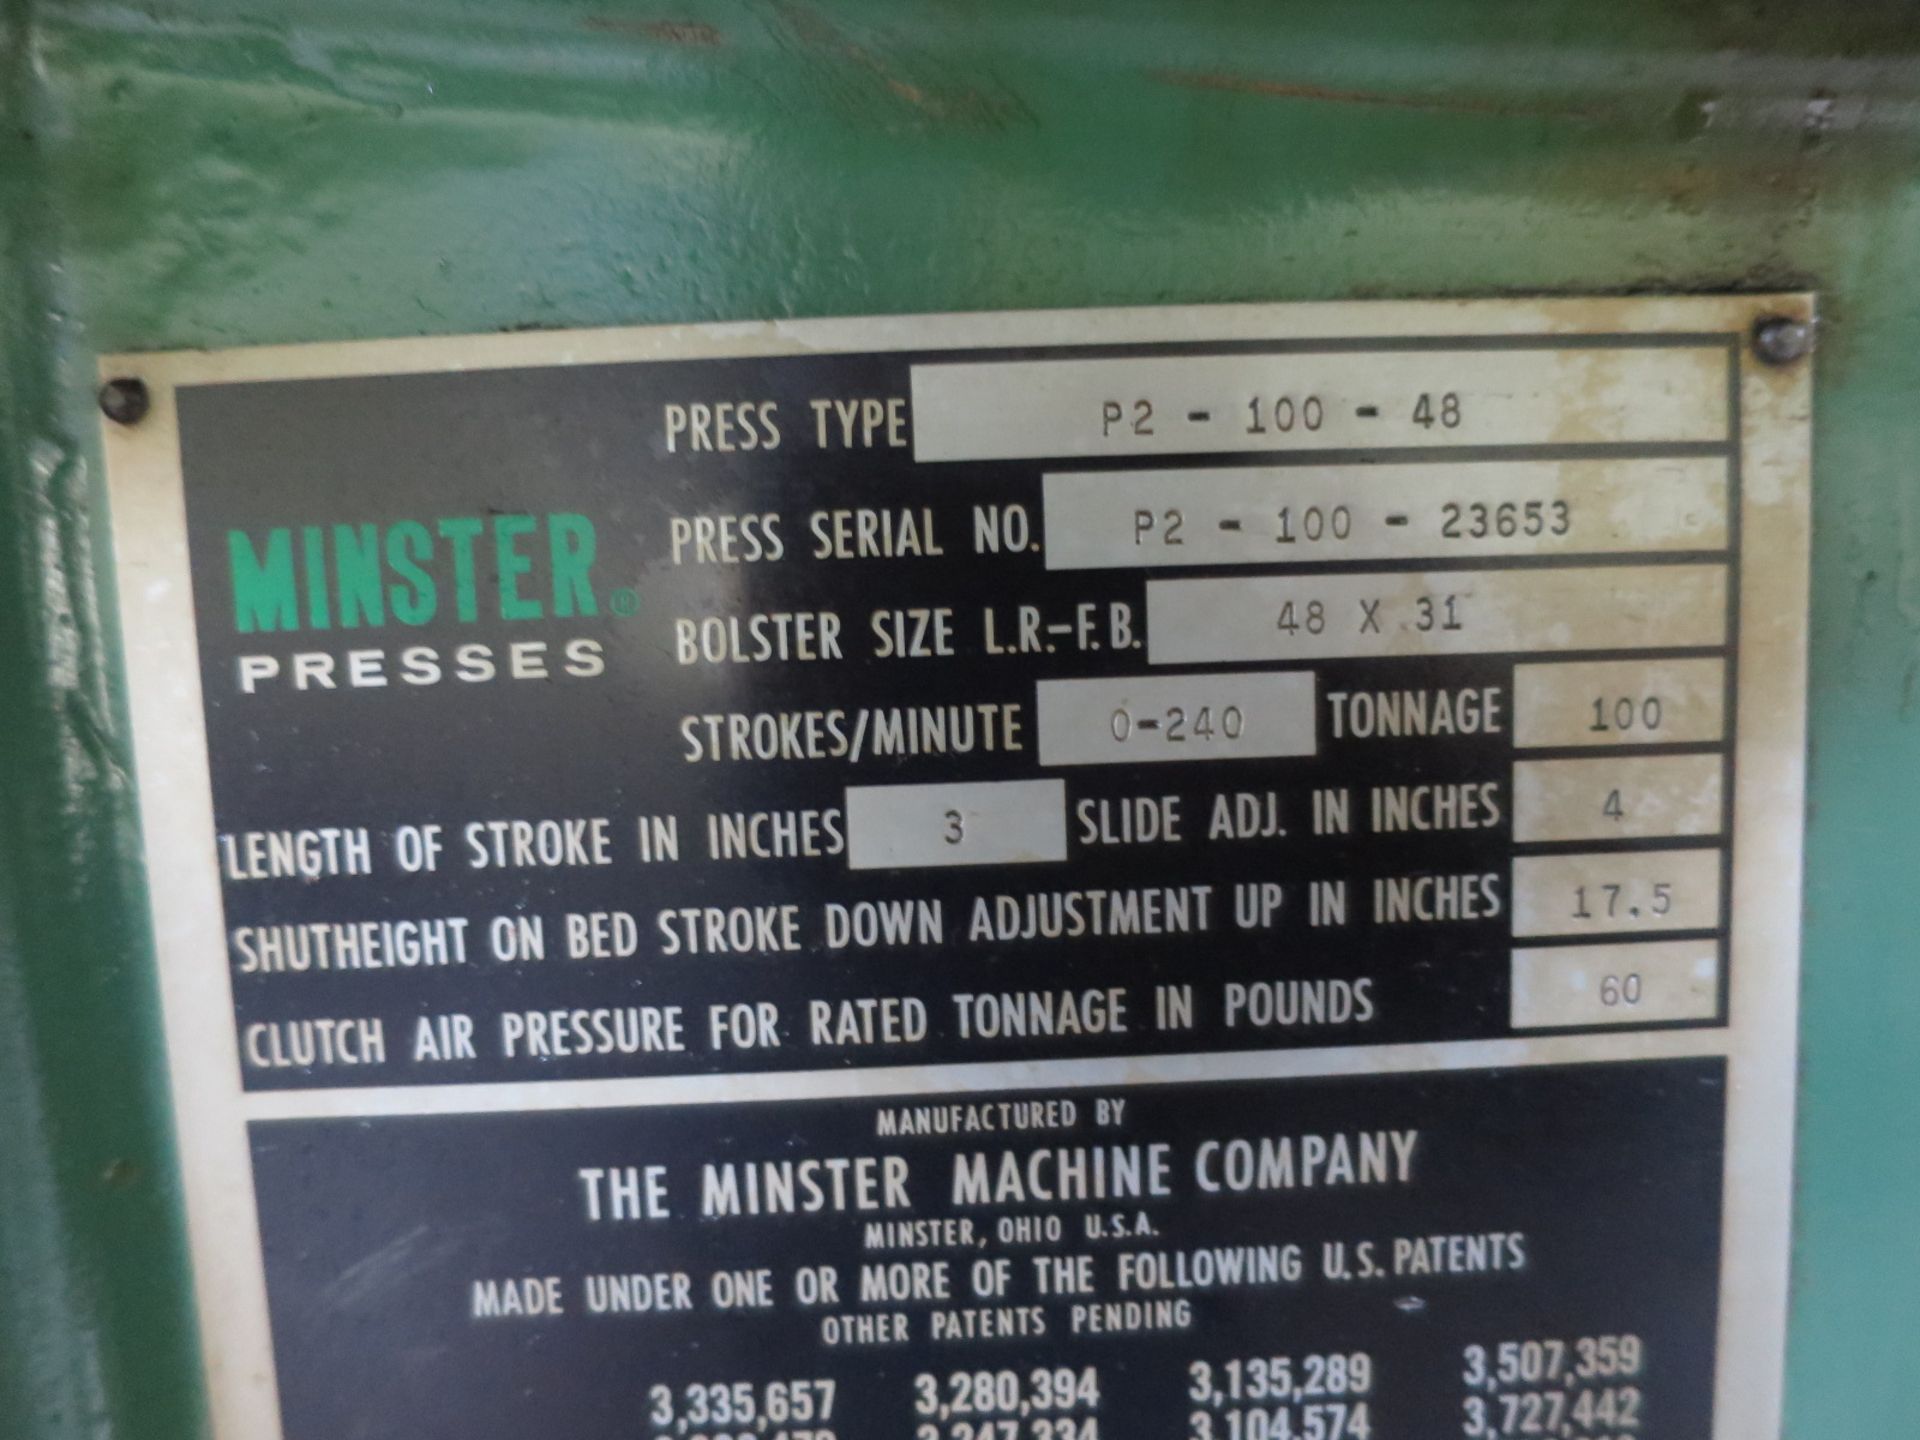 Minster 100 Ton Piece-Maker Variable Speed Stamping Press Model P2-100-48, Sn P2-100-23653 48" x 31" - Image 5 of 7